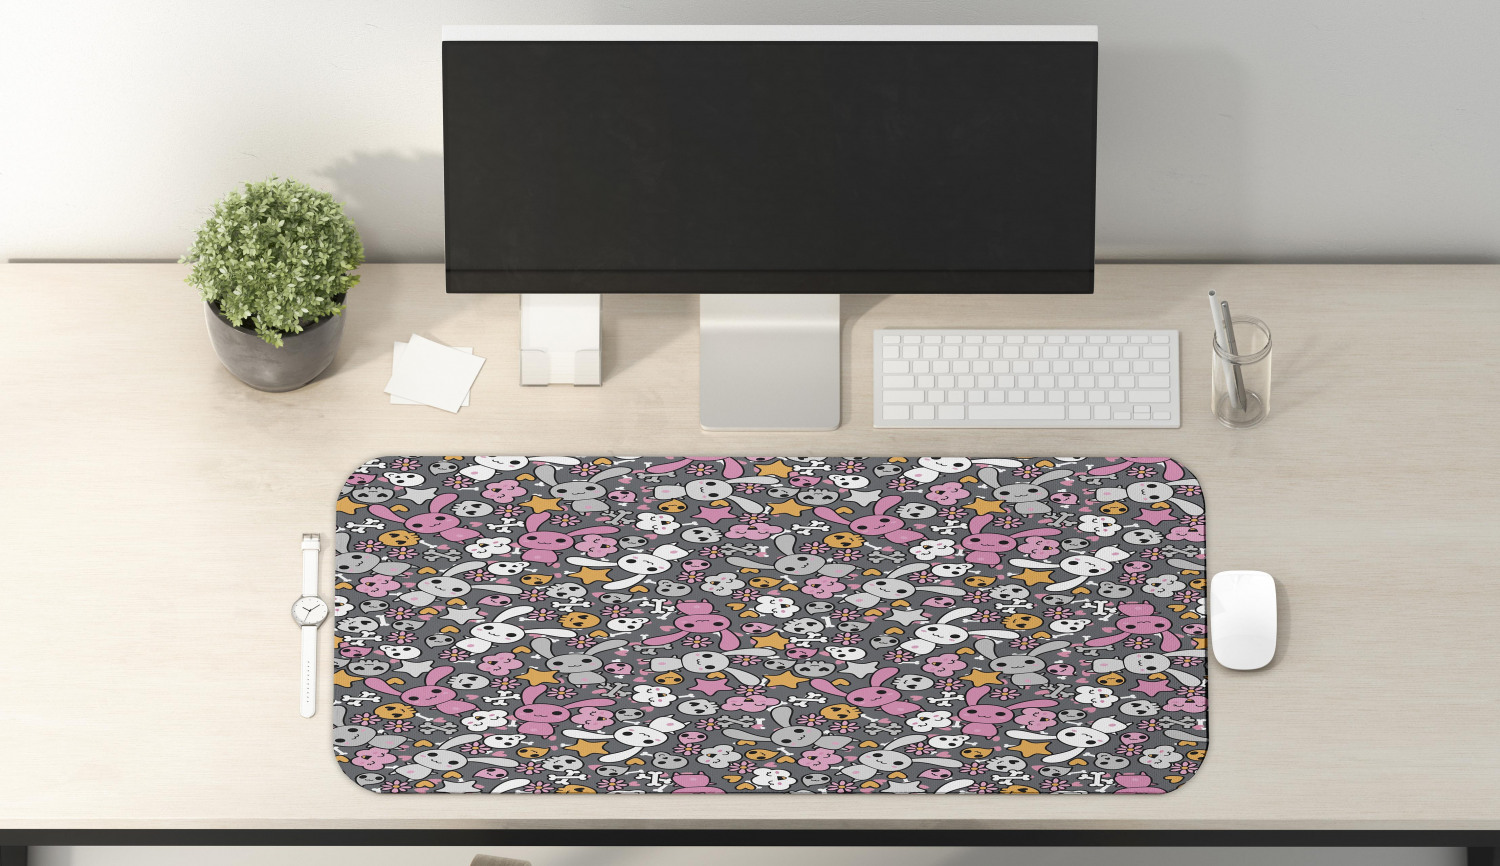 Cartoon Computer Mouse Pad, Kawaii Bunnies and Clouds Heart Eyed Skulls Japanese Anime Design Print, Rectangle Non-Slip Rubber Mousepad Large, 31" x 12" Gaming Size, Multicolor, by Ambesonne - image 2 of 2